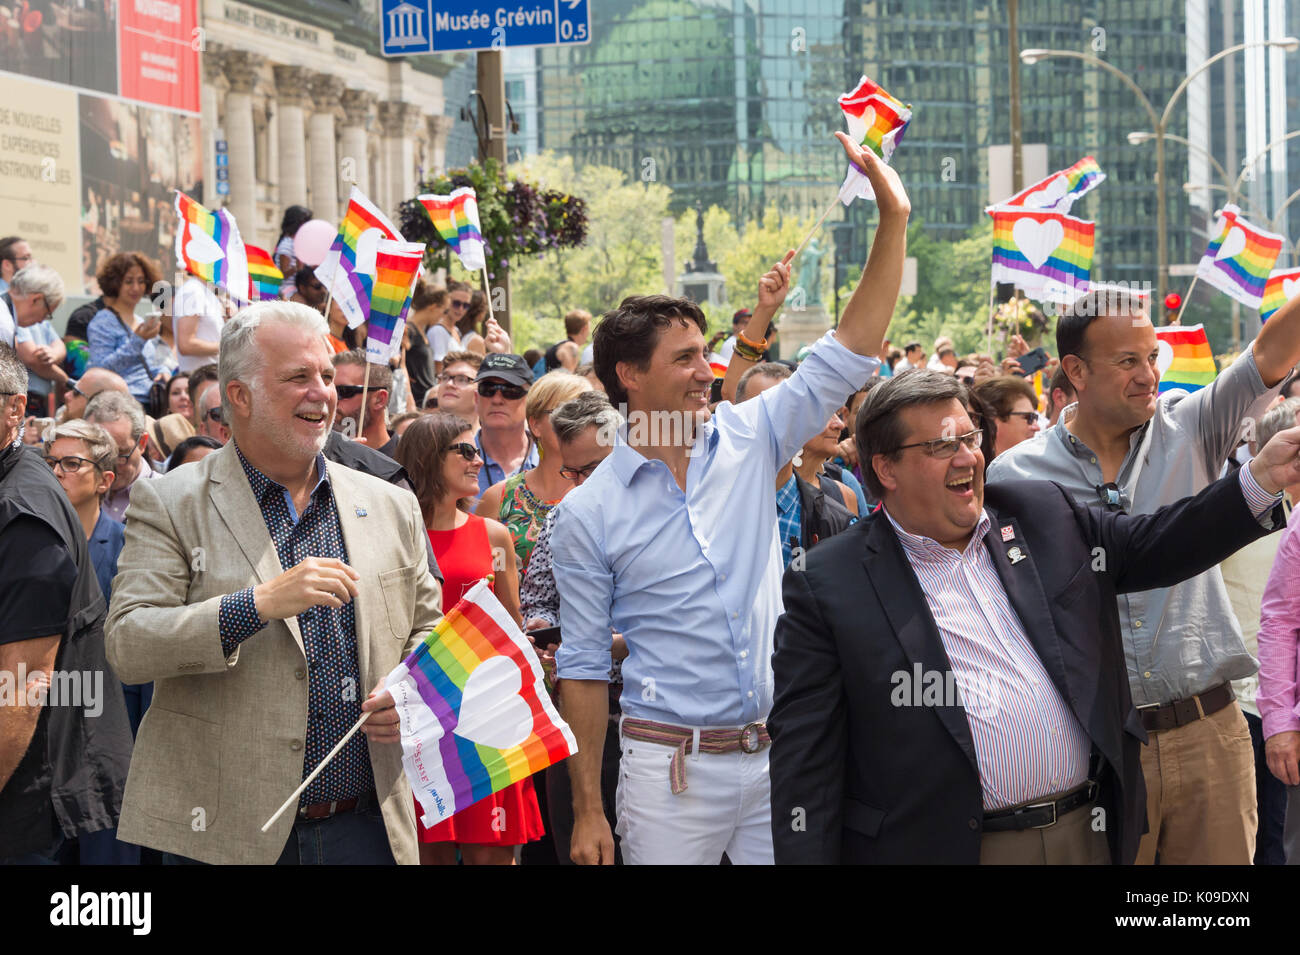 Canadian PM Justin Trudeau, Montreal Mayor Denis Coderre, Ireland PM Leo Varadkar and Quebec PM Philippe Couillard take part in Montreal Pride Parade  Stock Photo